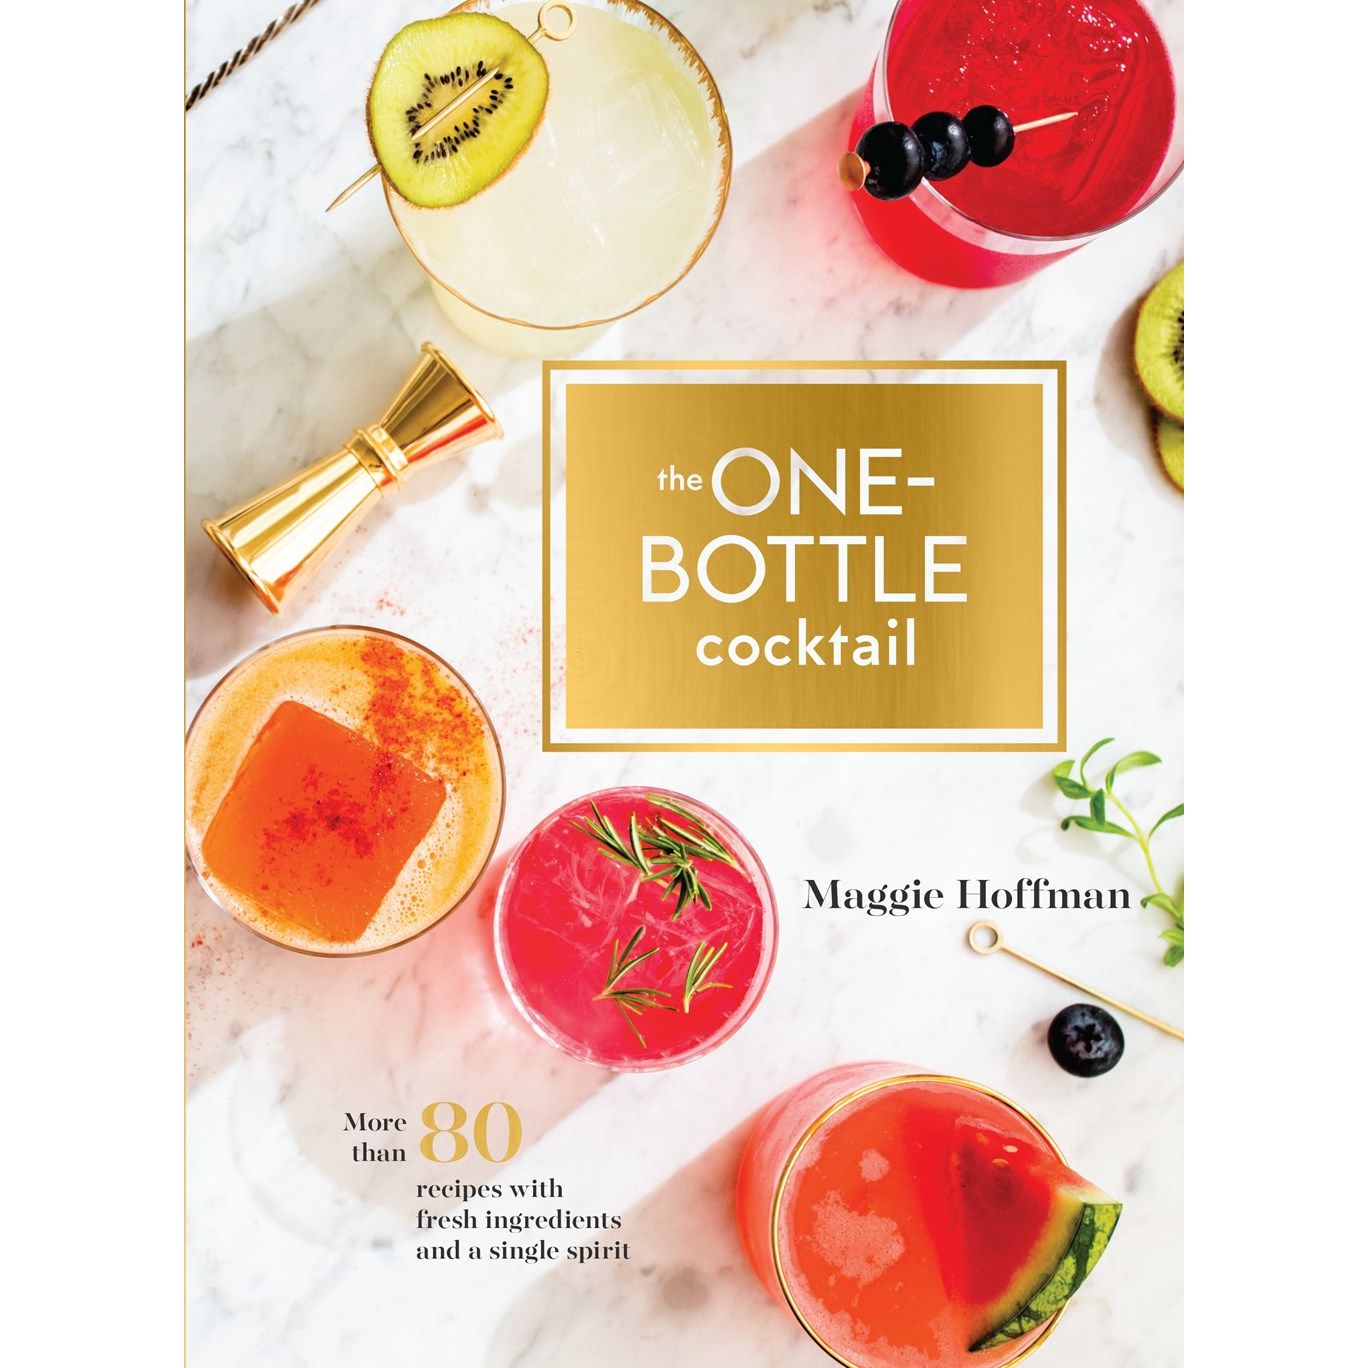 The One-Bottle Cocktail (Maggie Hoffman)